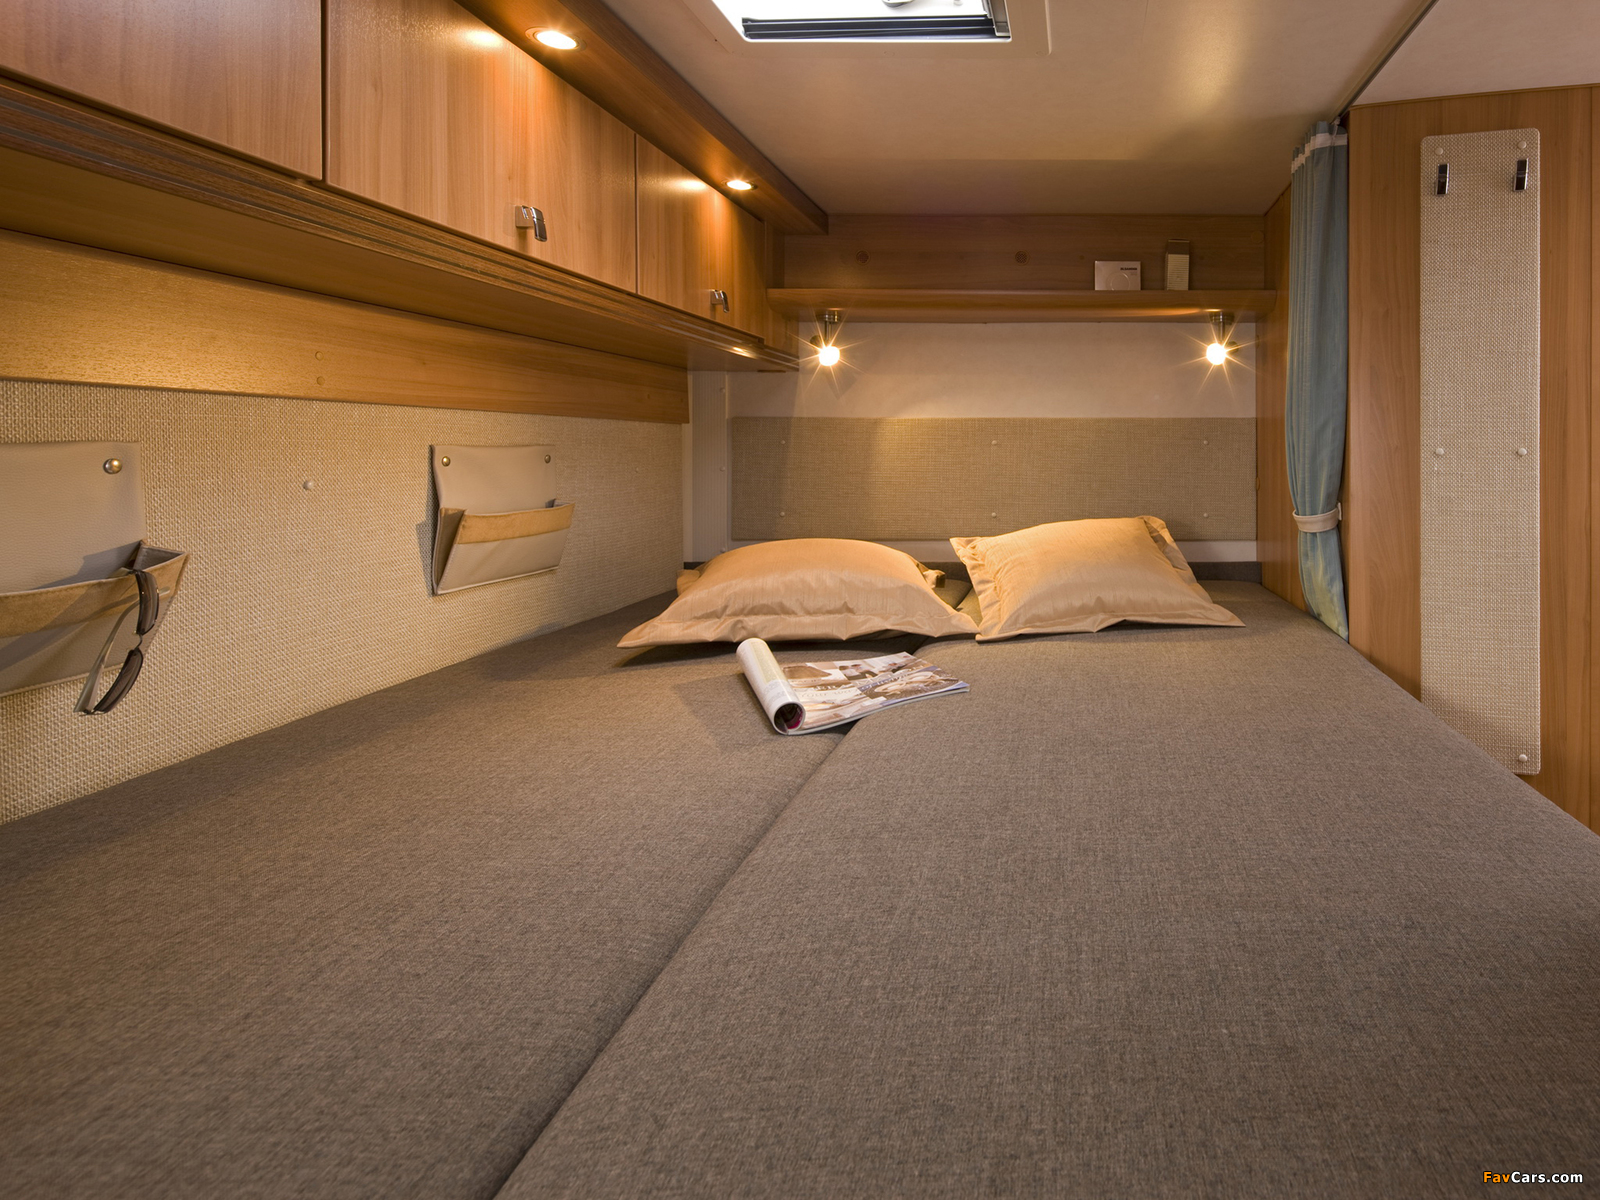 Hymer Camp 634 2009–10 wallpapers (1600 x 1200)